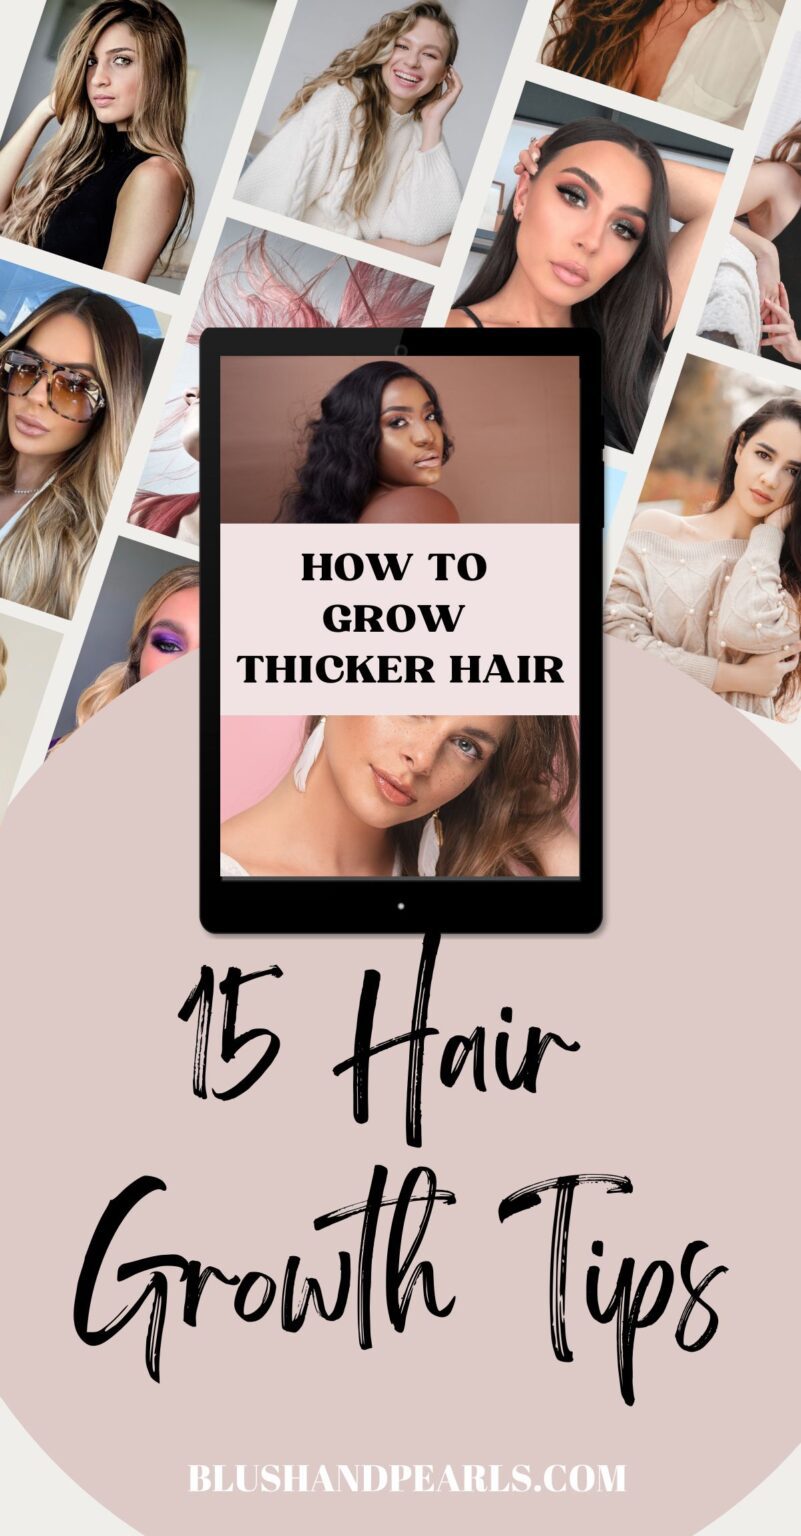 15 Tips To Make Hair Grow Thicker & Healthier